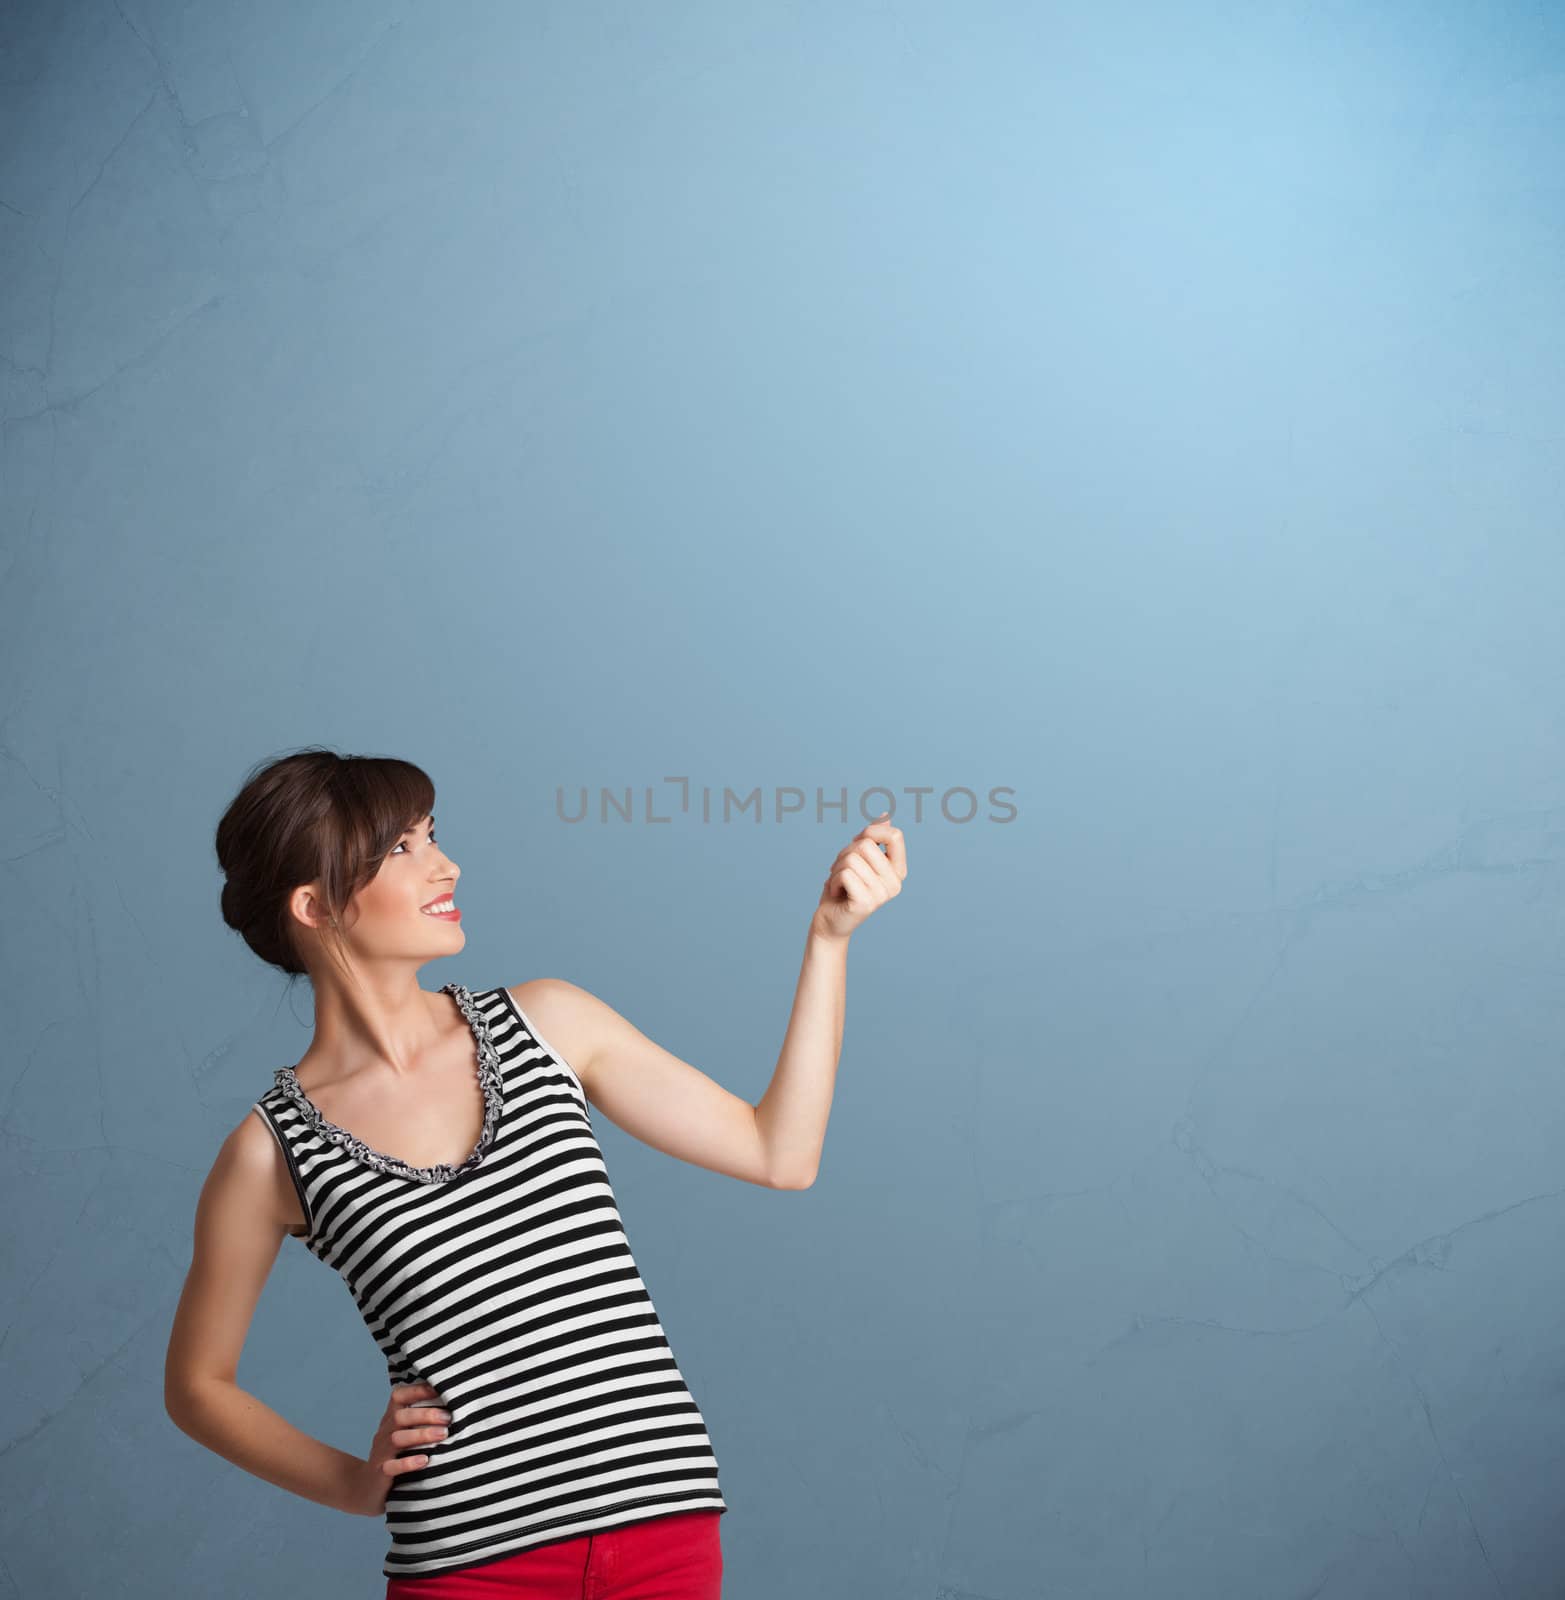 Pretty lady gesturing with copy space by ra2studio